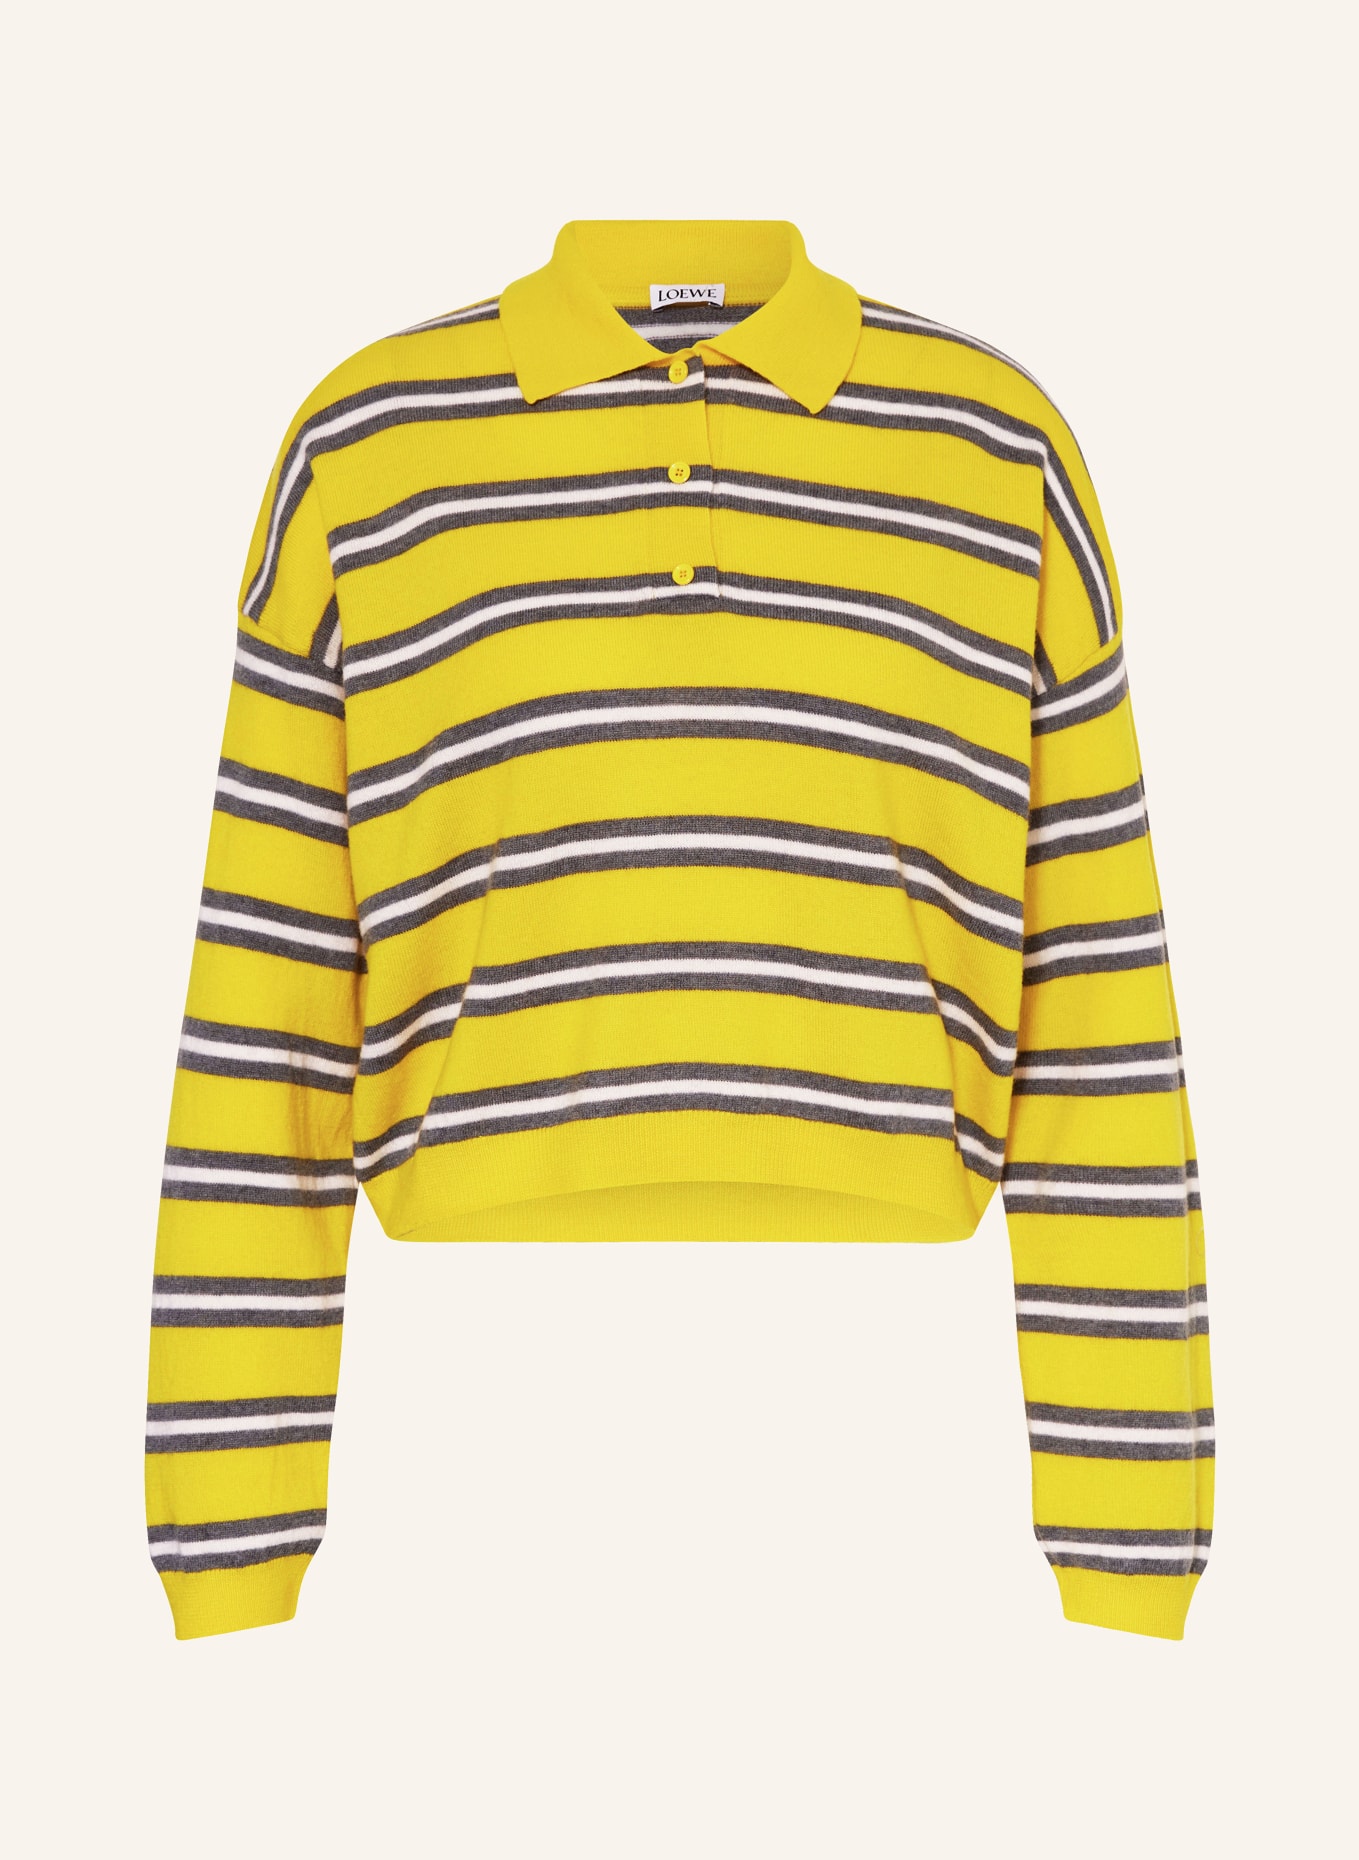 LOEWE Knitted polo shirt made of linen, Color: YELLOW/ GRAY/ WHITE (Image 1)